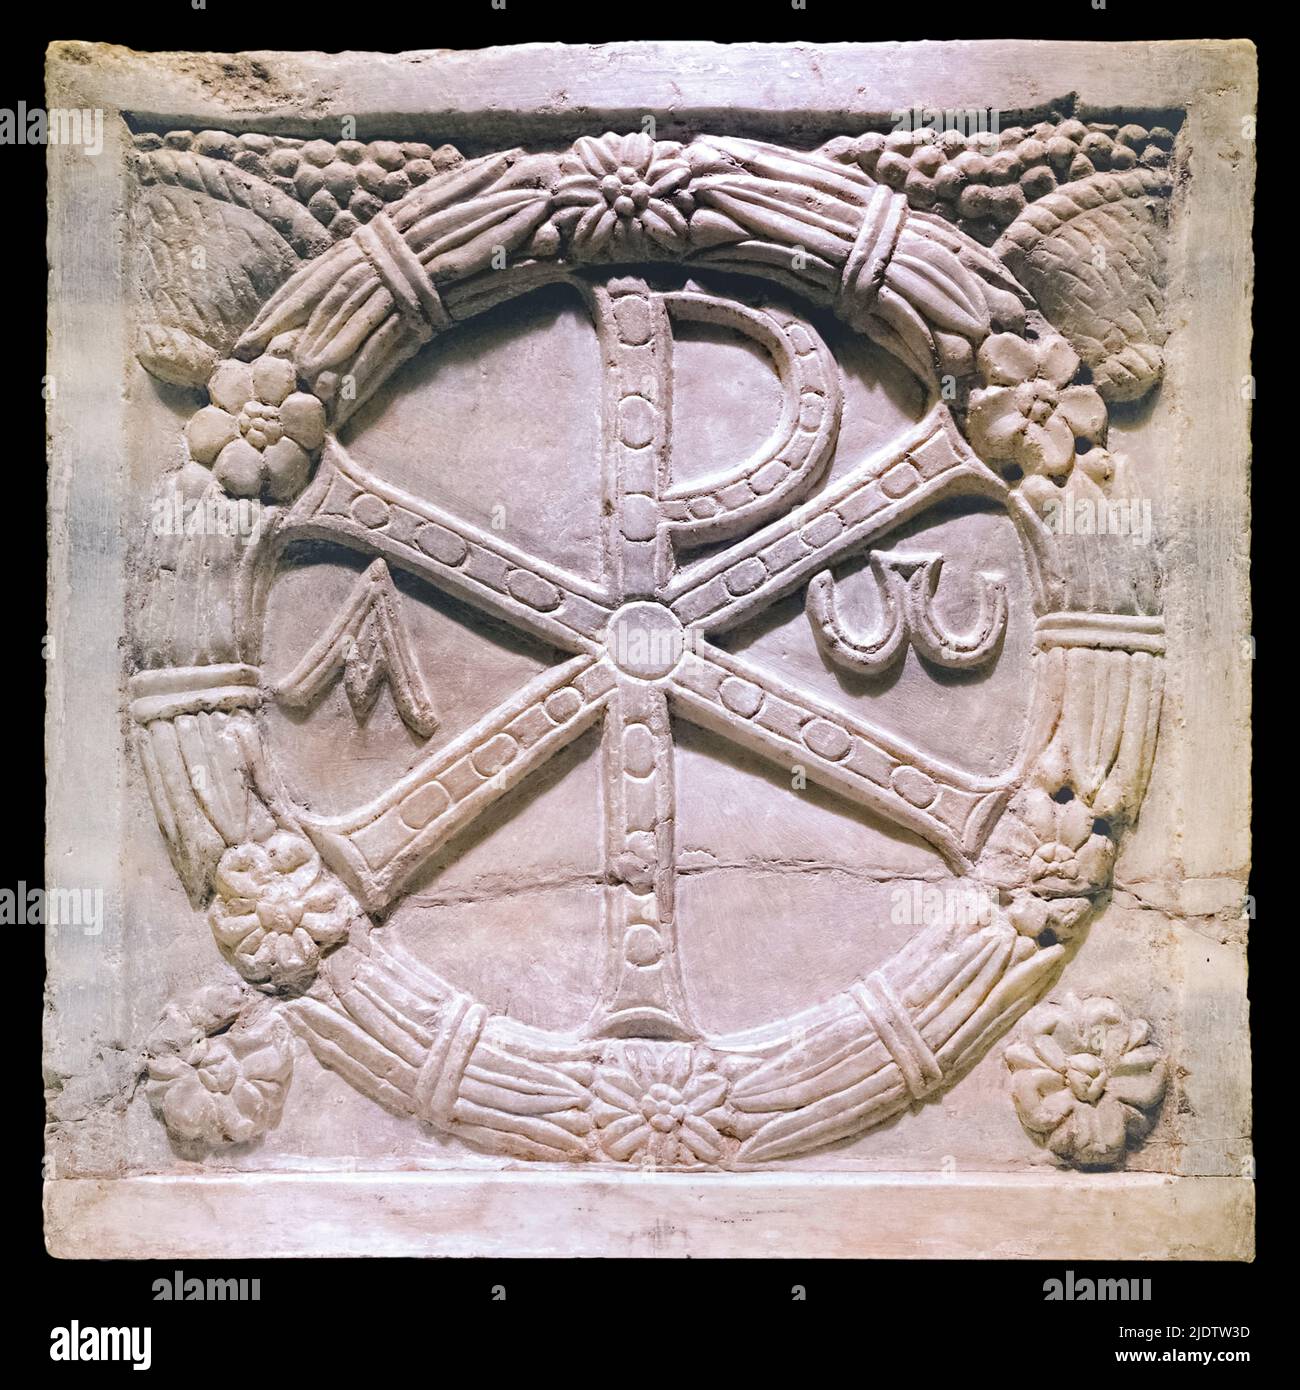 Chi Rho or Chiro monogram that forms an abbreviation for the name of Jesus Christ carved in marble together with the Greek symbols of Alpha and Omega originally from a 4th-century sarcophagus and now in the Vatican Museum’s collection. Stock Photo